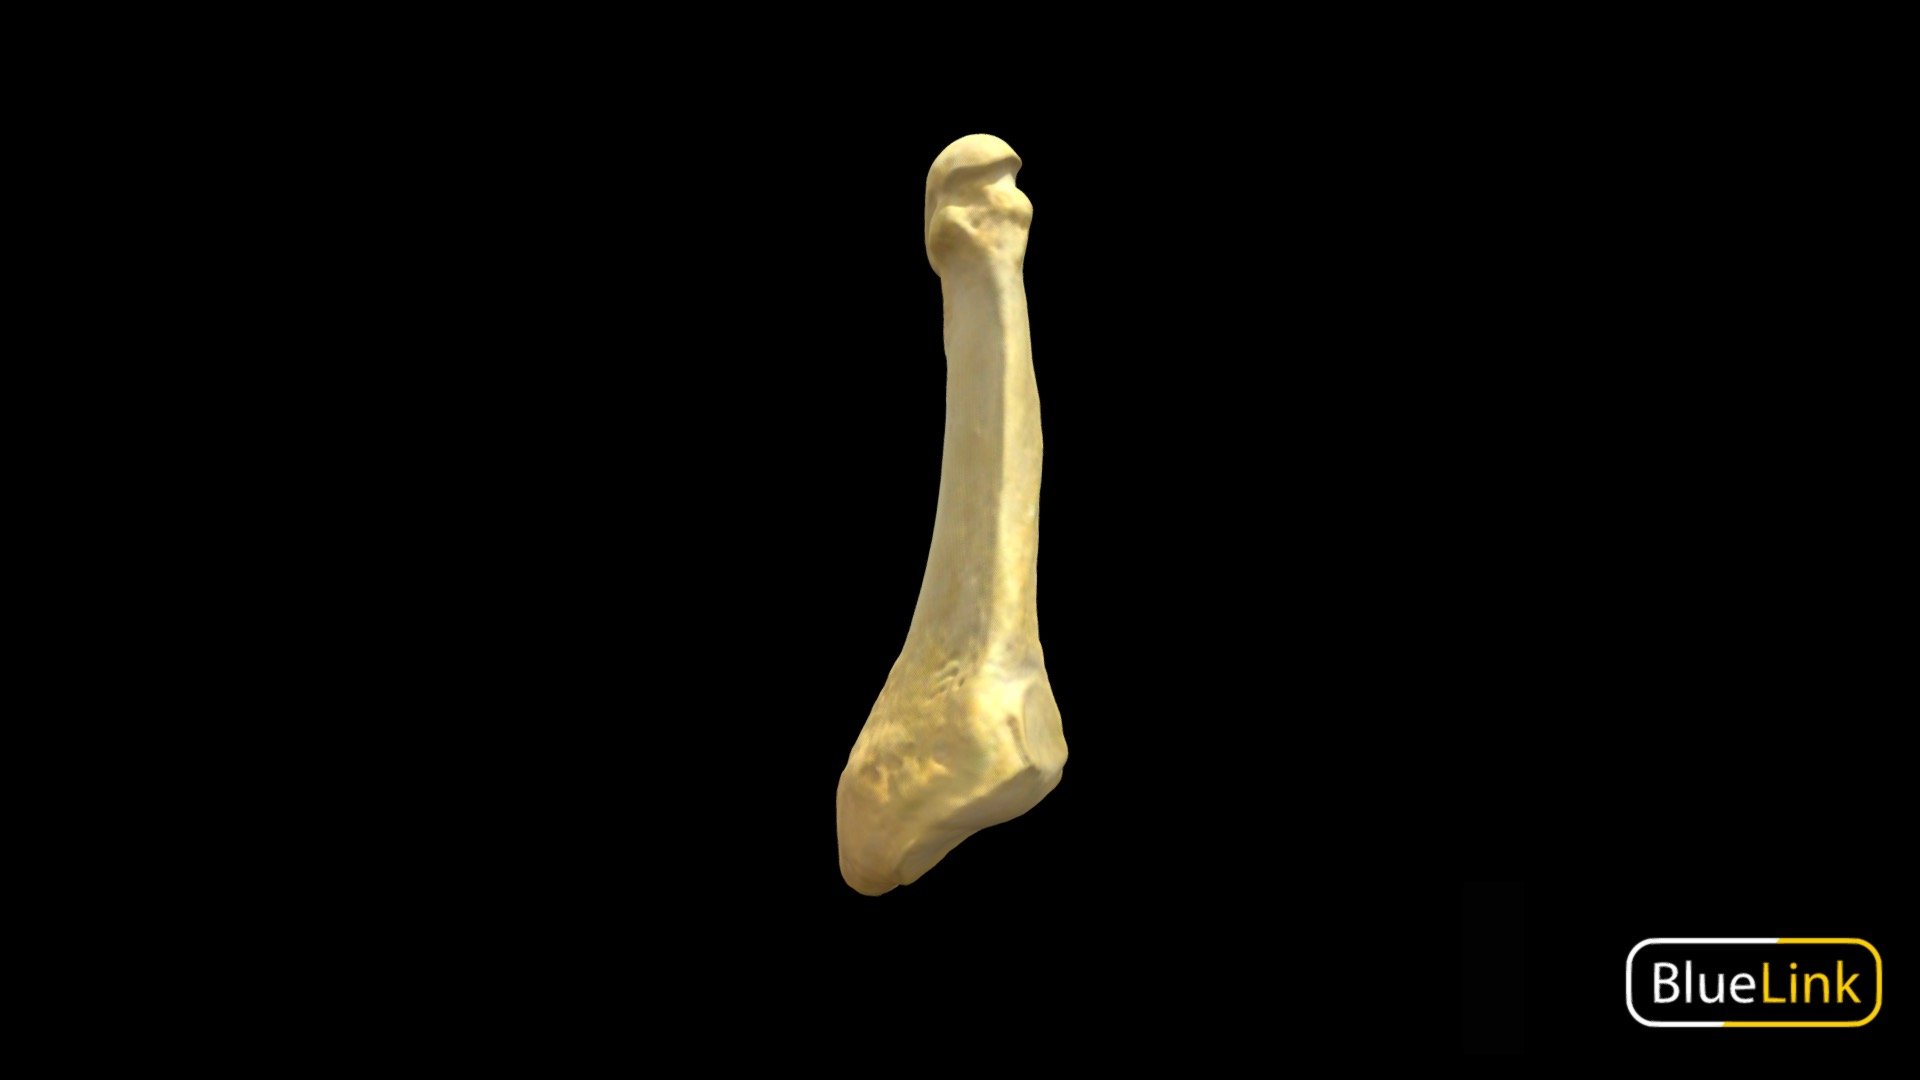 3D scan of the fifth metatarsal of the left foot

Captured with Einscan Pro

Captured and edited by: Madelyn Murphy

Copyright2019 BK Alsup &amp; GM Fox - Metatarsal 5 - Left, Unlabeled - 3D model by Bluelink Anatomy - University of Michigan (@bluelinkanatomy) 3d model